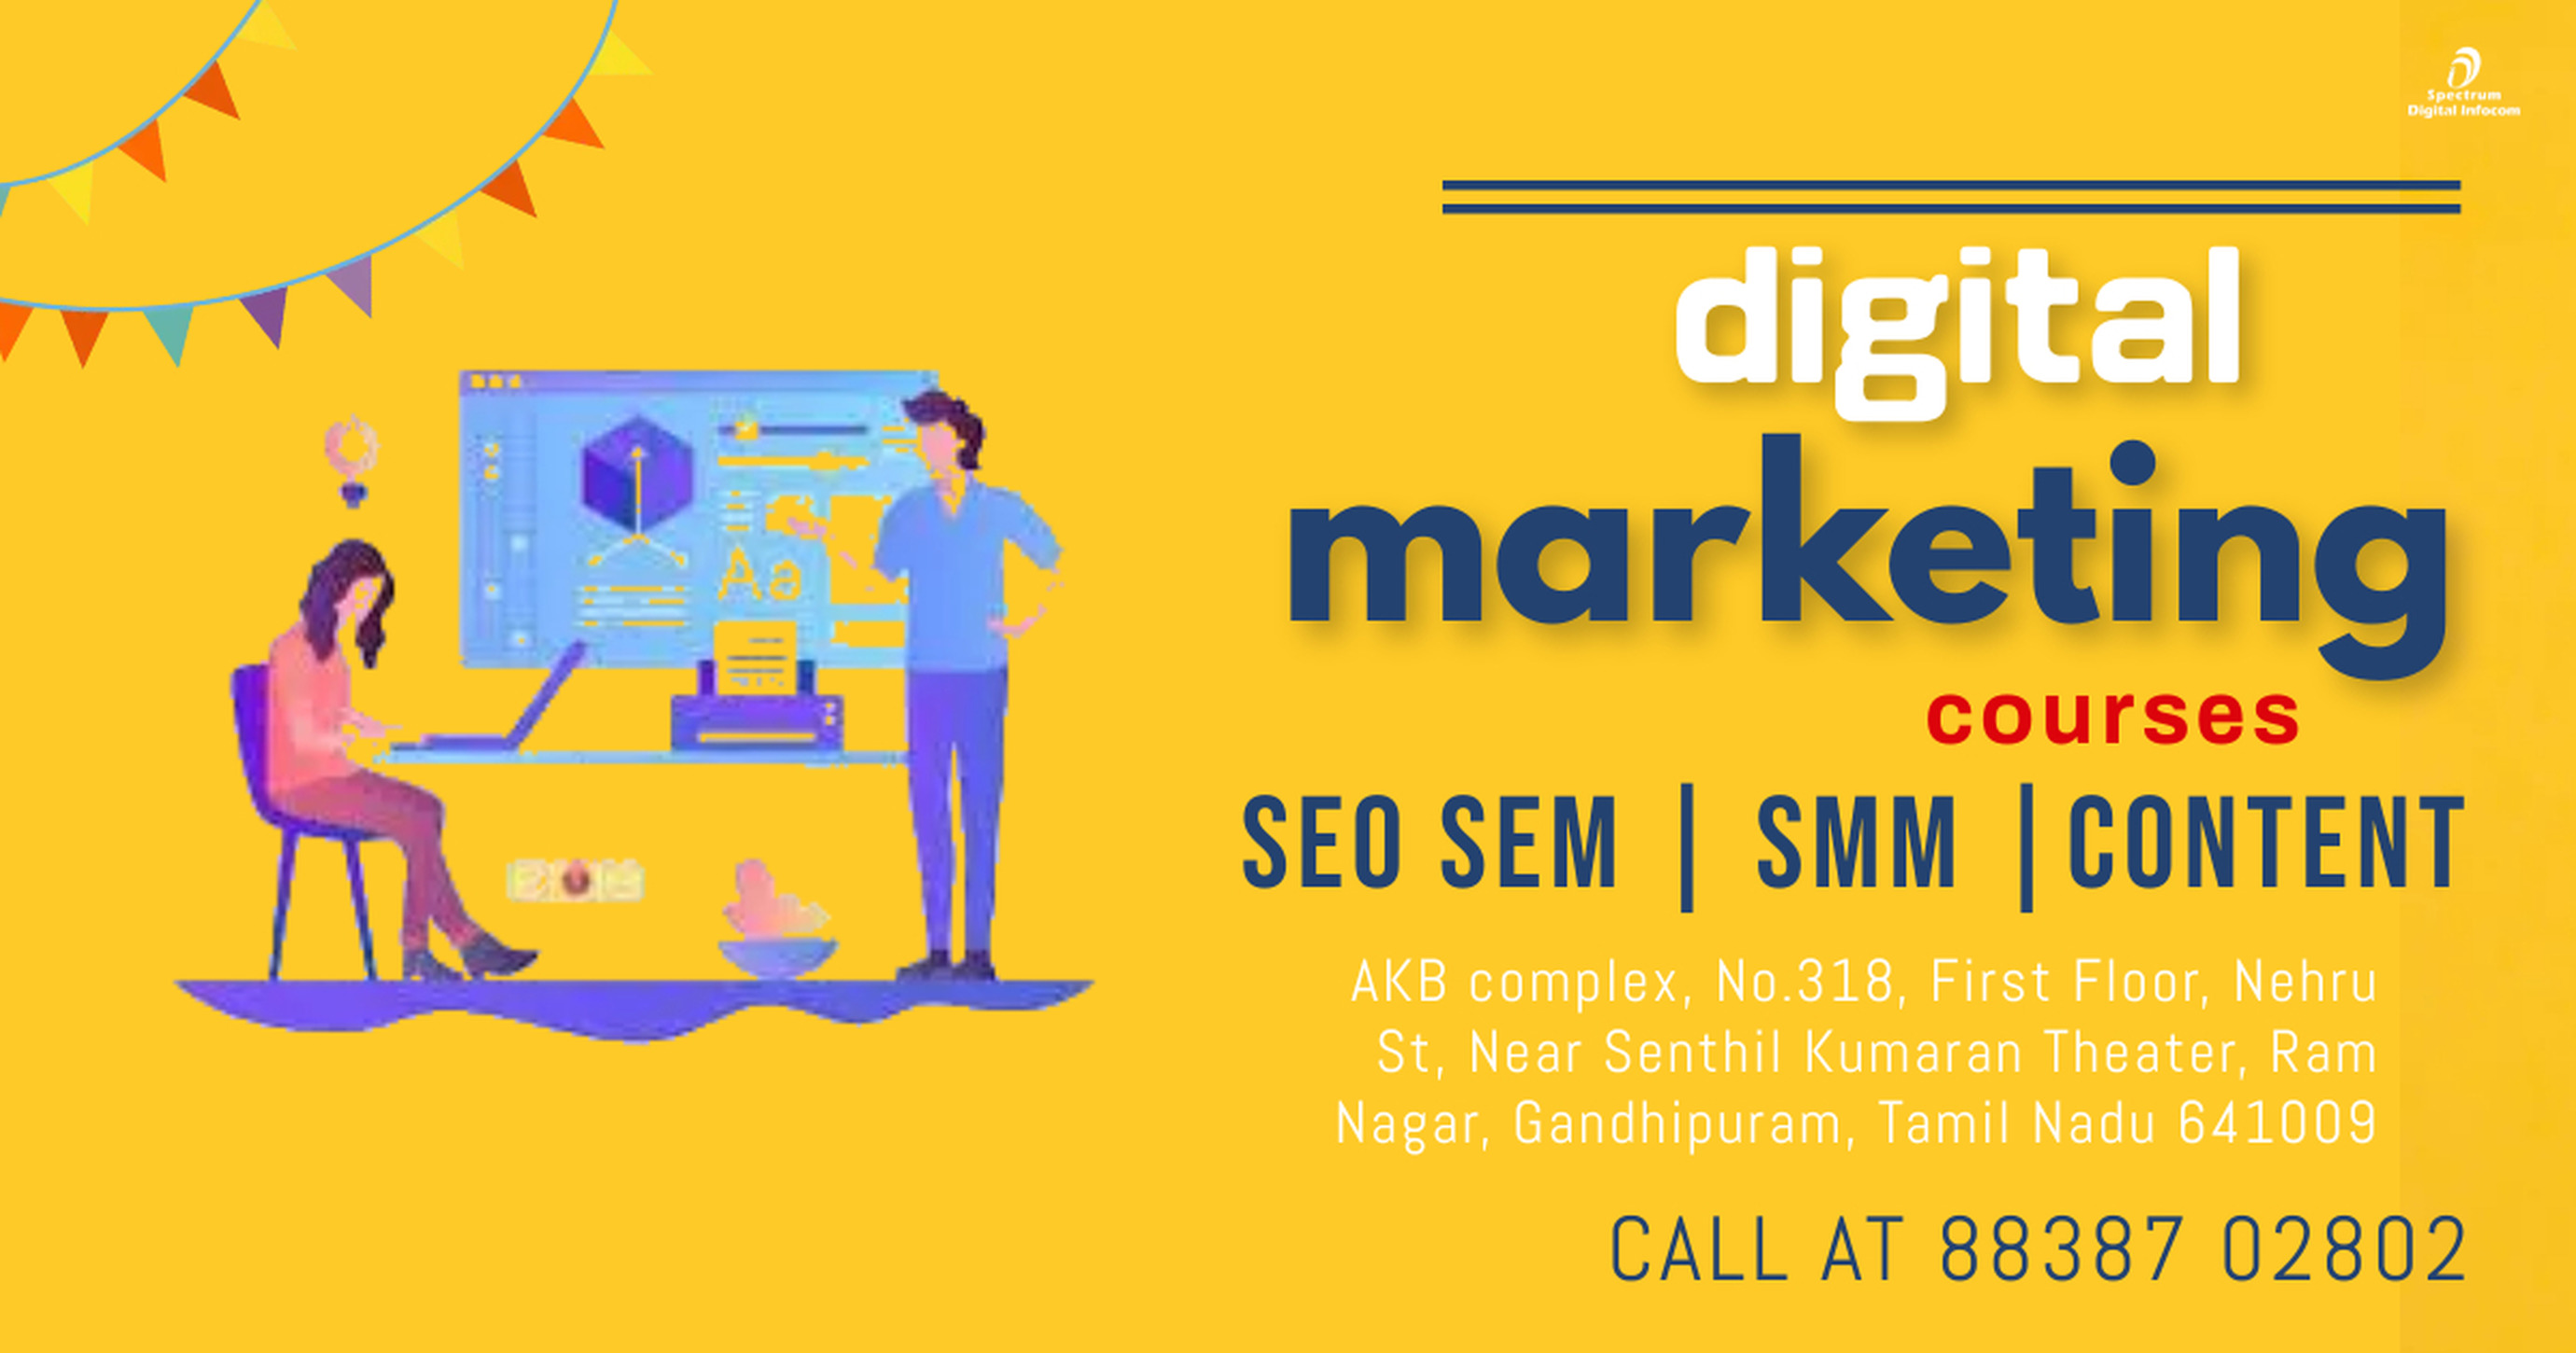 digital marketing course in coimbatore@676767, Online Event